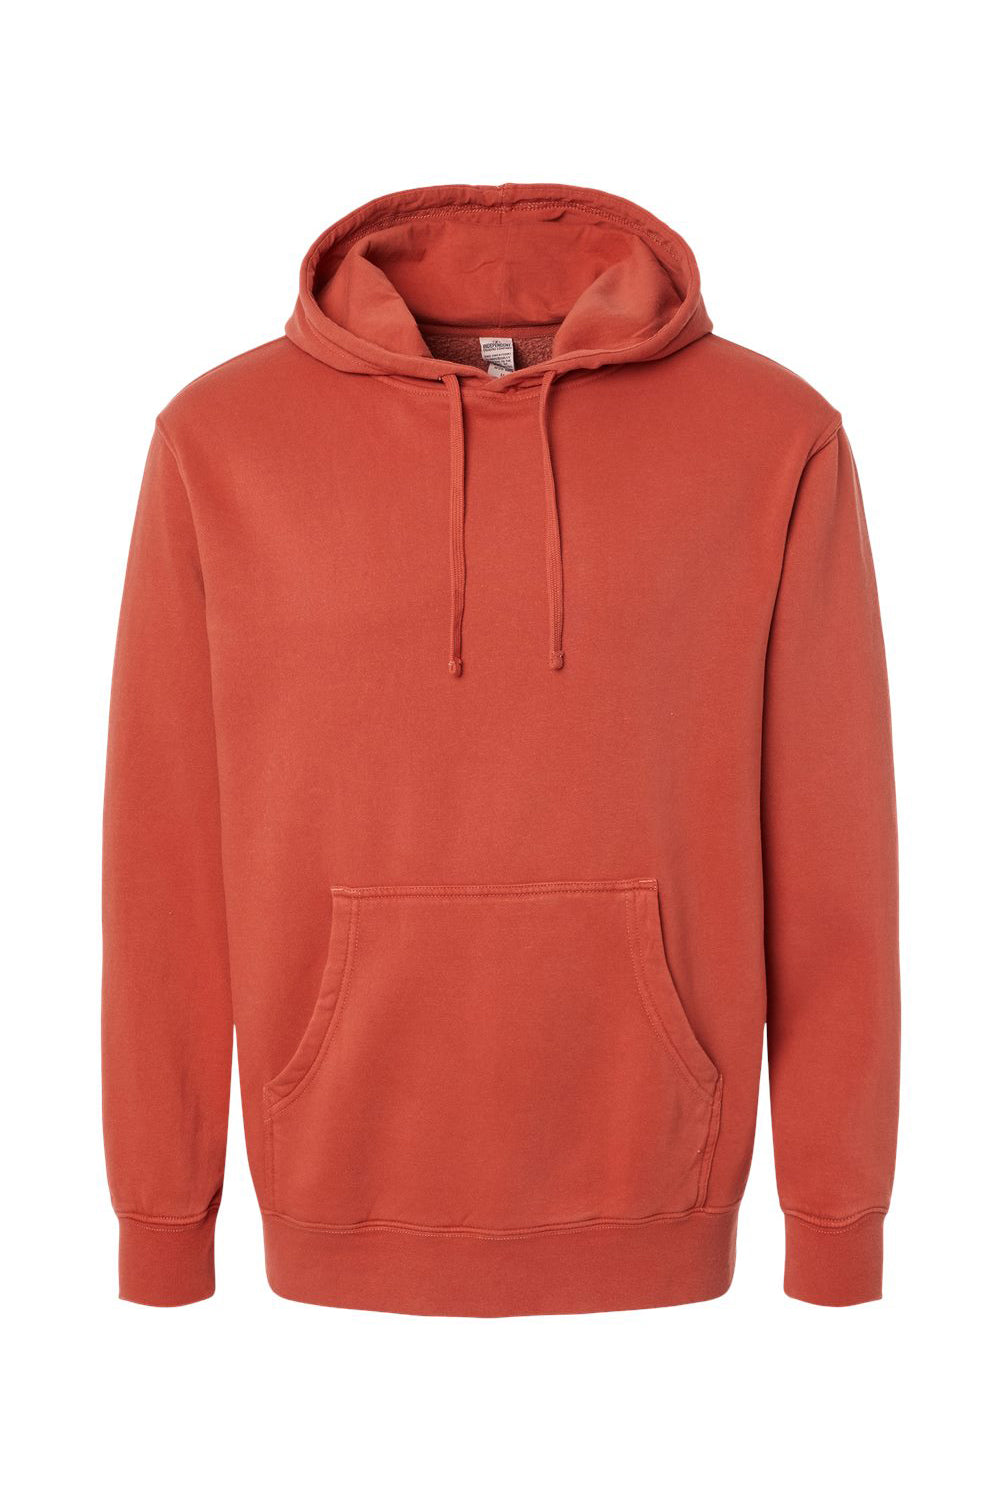 Independent Trading Co. PRM4500 Mens Pigment Dyed Hooded Sweatshirt Hoodie Amber Flat Front